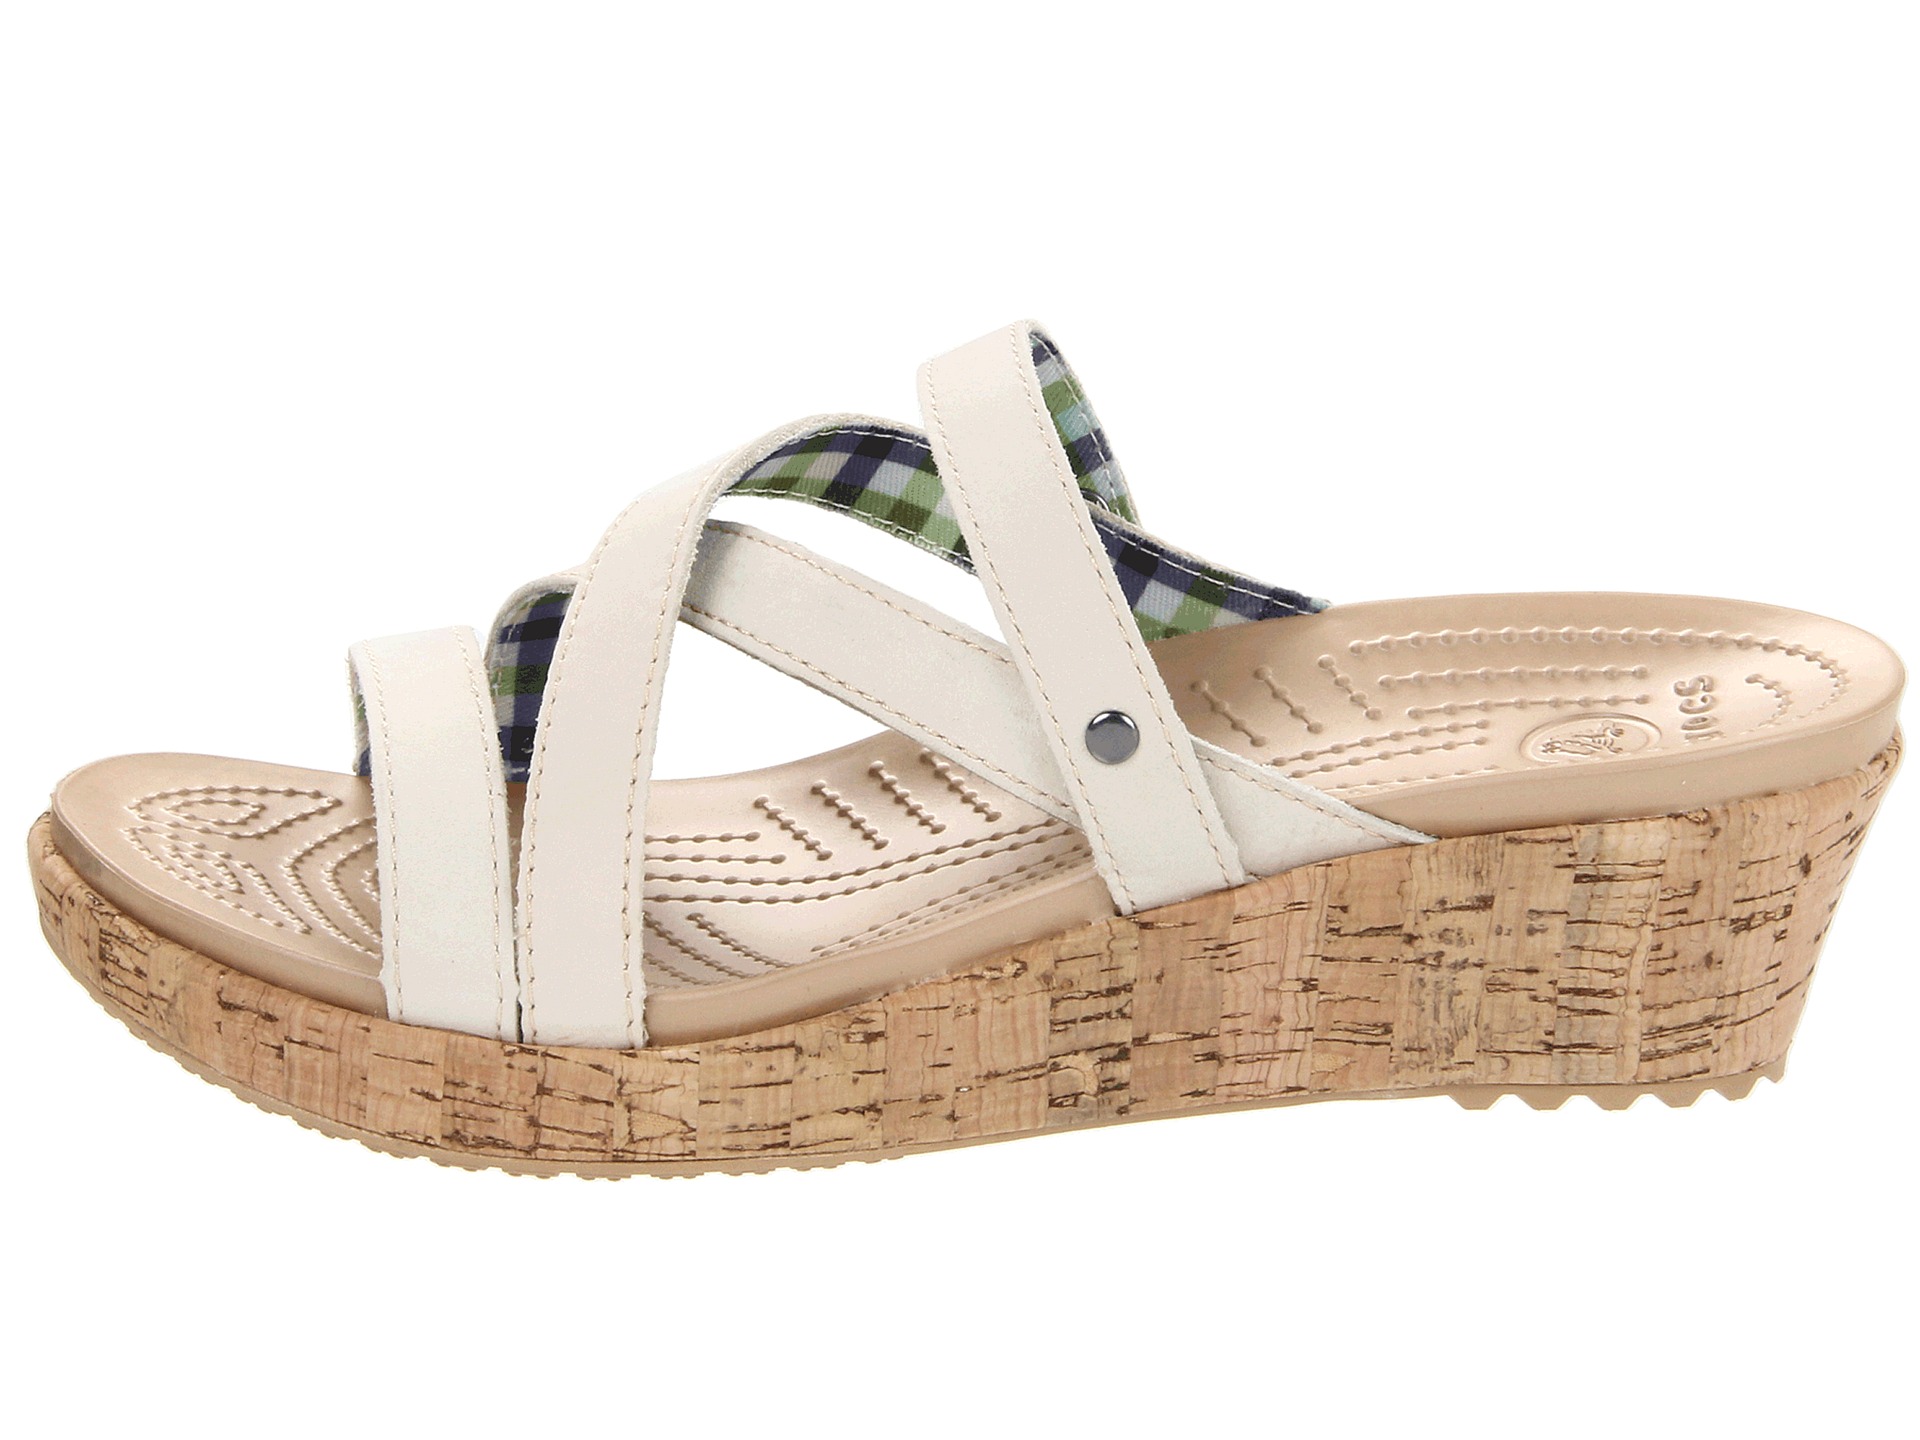 Crocs A Leigh Mini Wedge Leather Stucco Stucco | Shipped Free at Zappos